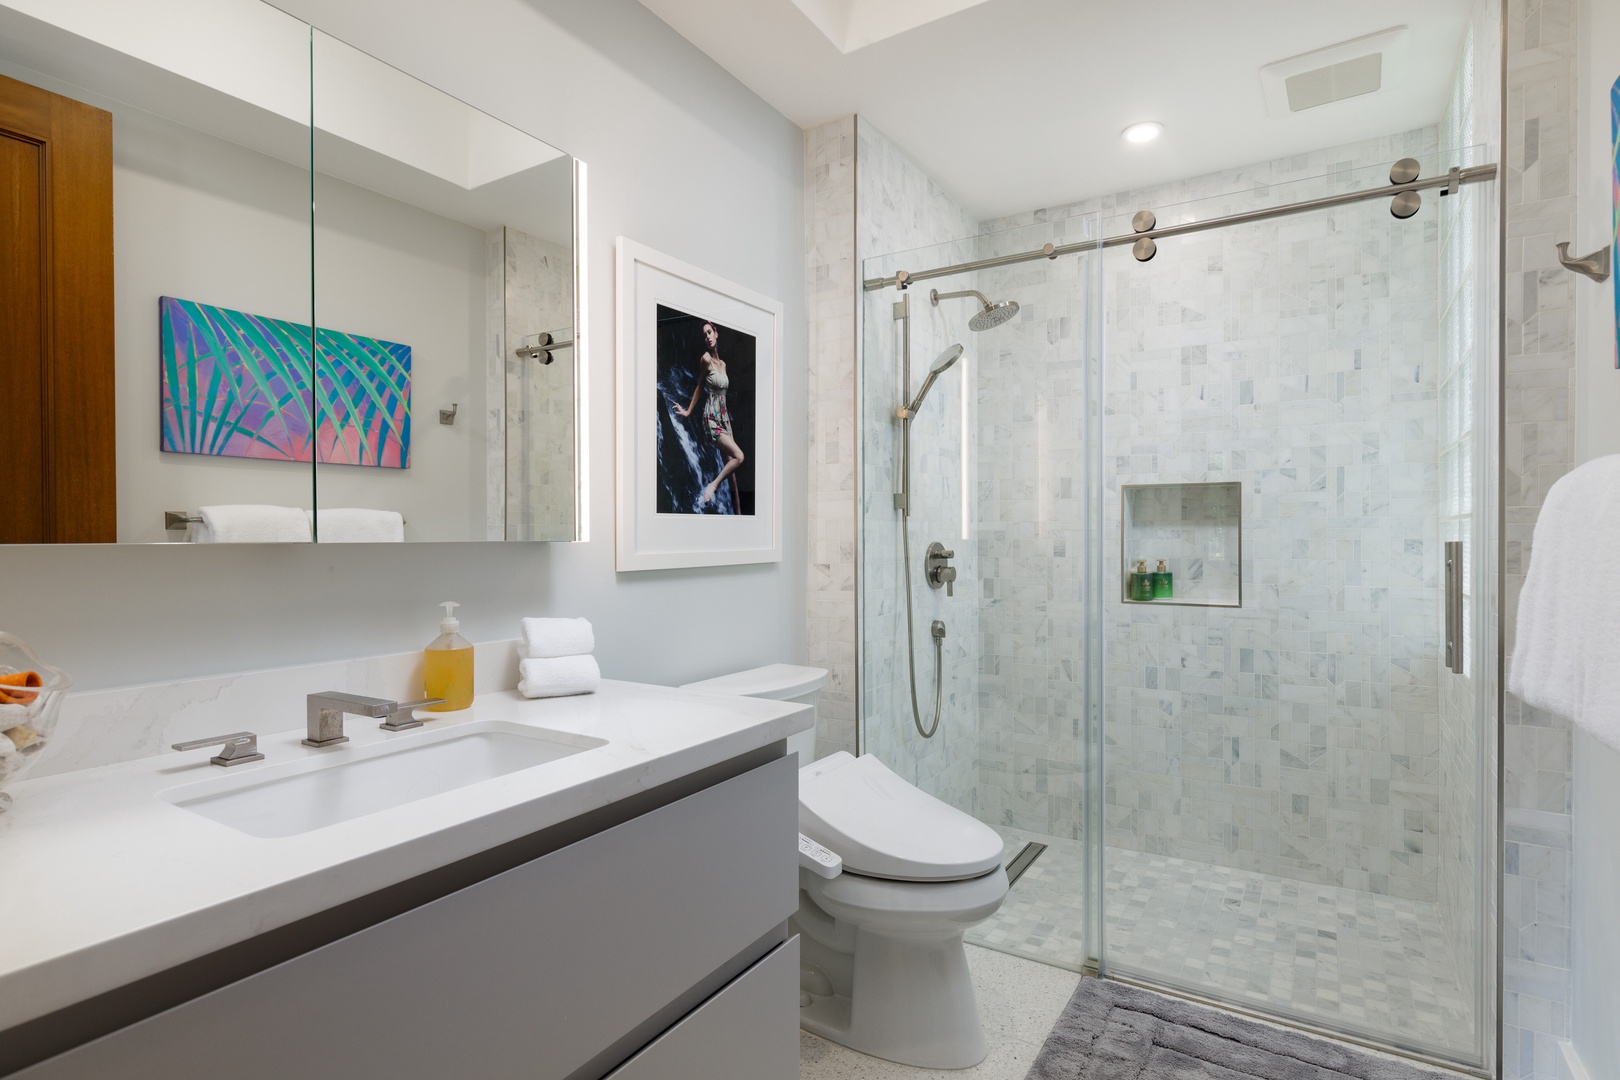 Kailua Kona Vacation Rentals, 3BD Fairways Villa (104A) at Four Seasons Resort at Hualalai - Ensuite bathroom with a walk-in shower in a glass enclosure.